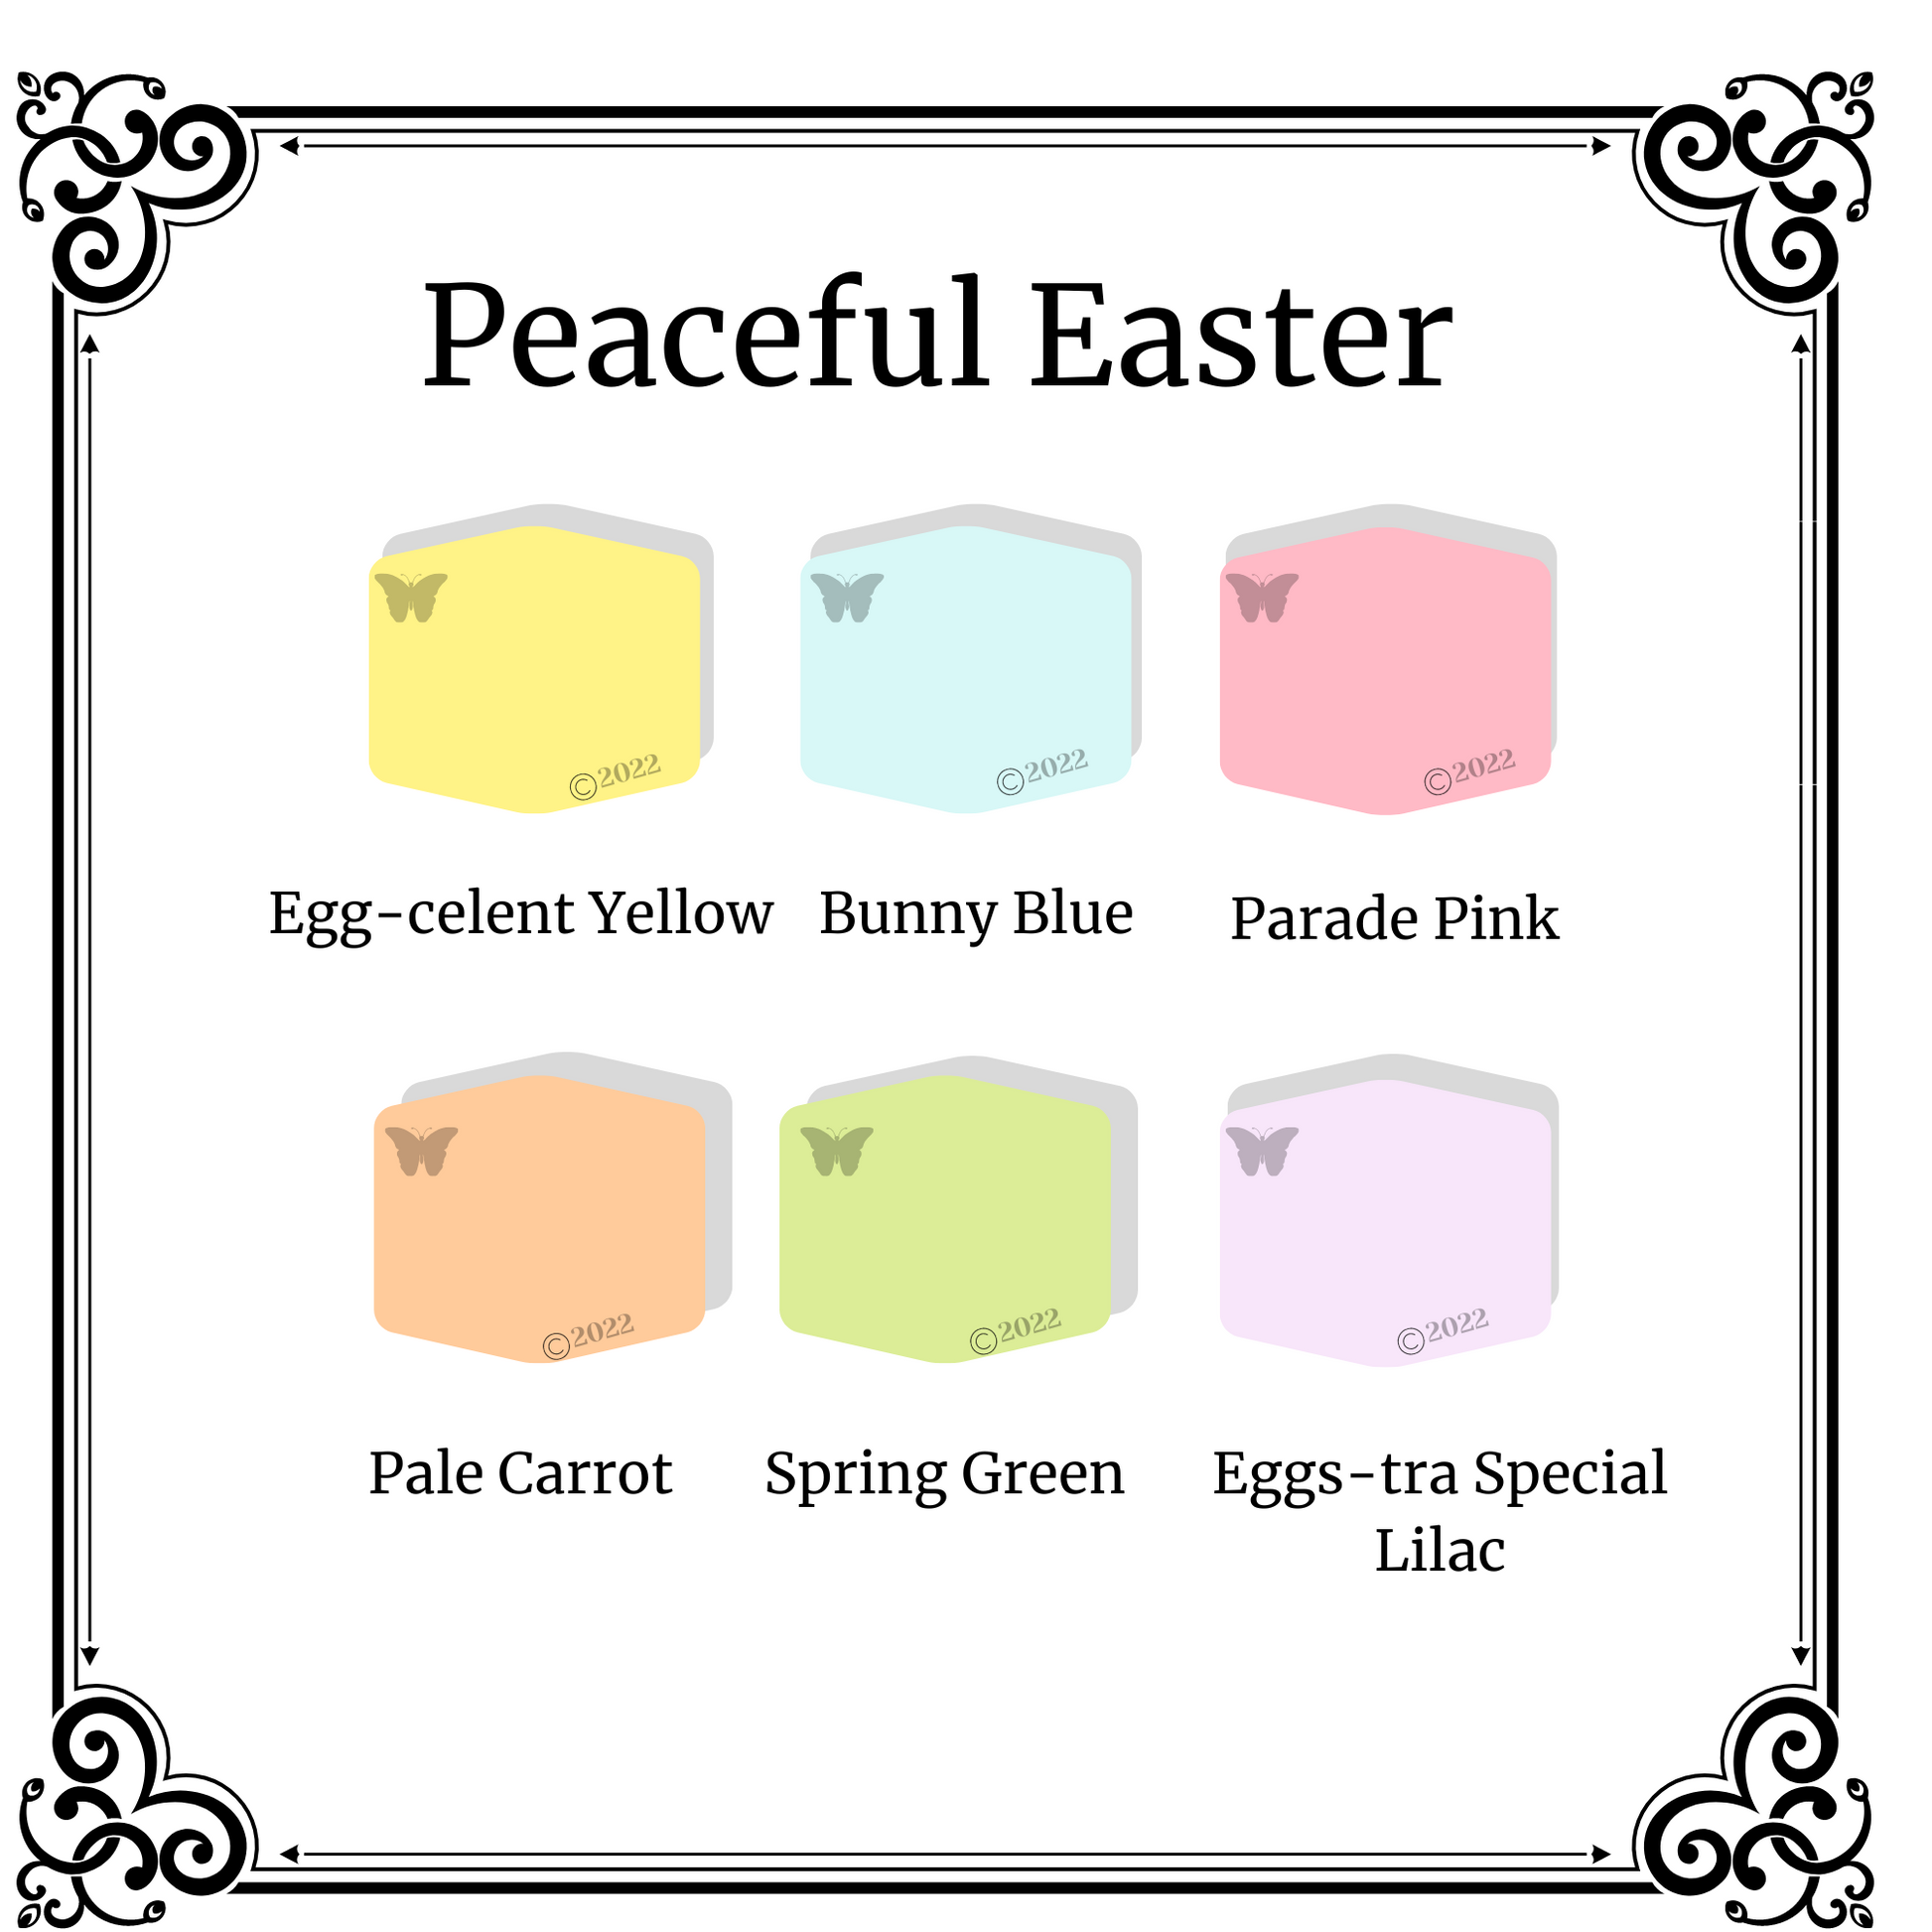 The Peaceful Easter palette contains the 6 colors Egg-celent Yellow, Bunny Blue, Parade Pink, Pale Carrot, Spring Green and Eggs-tra Special Lilac.